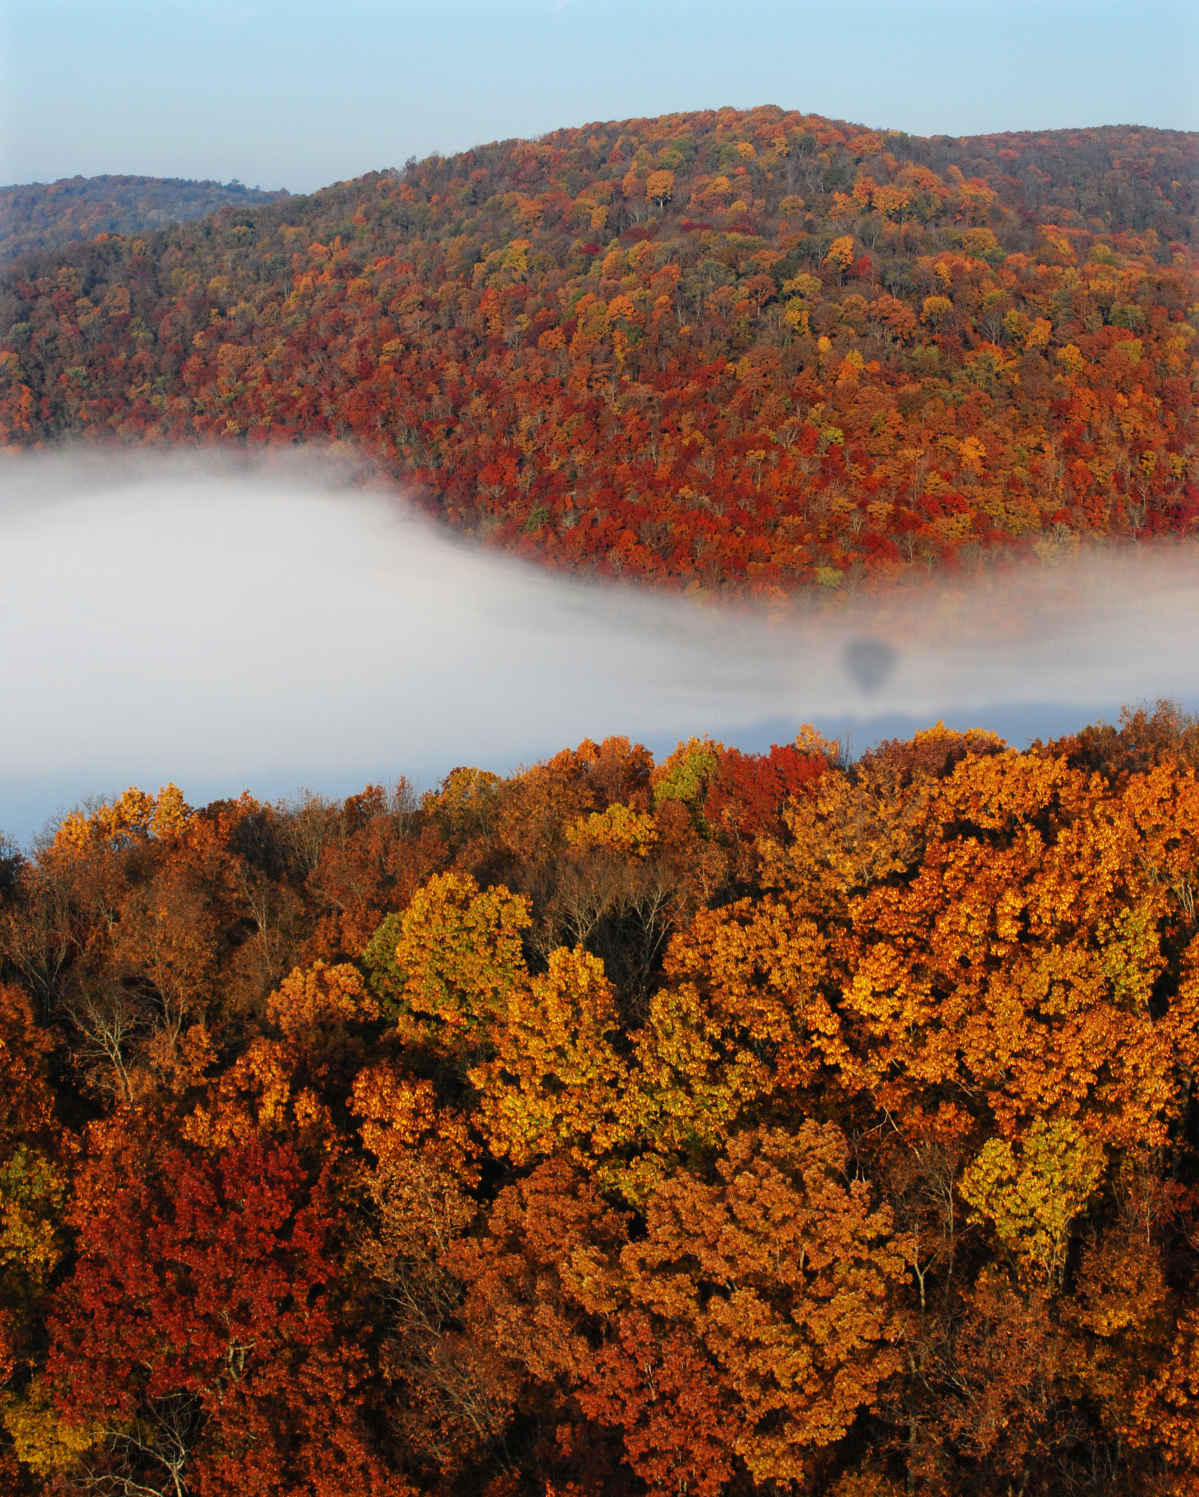 Large hillside covered with trees with fall colored leaves